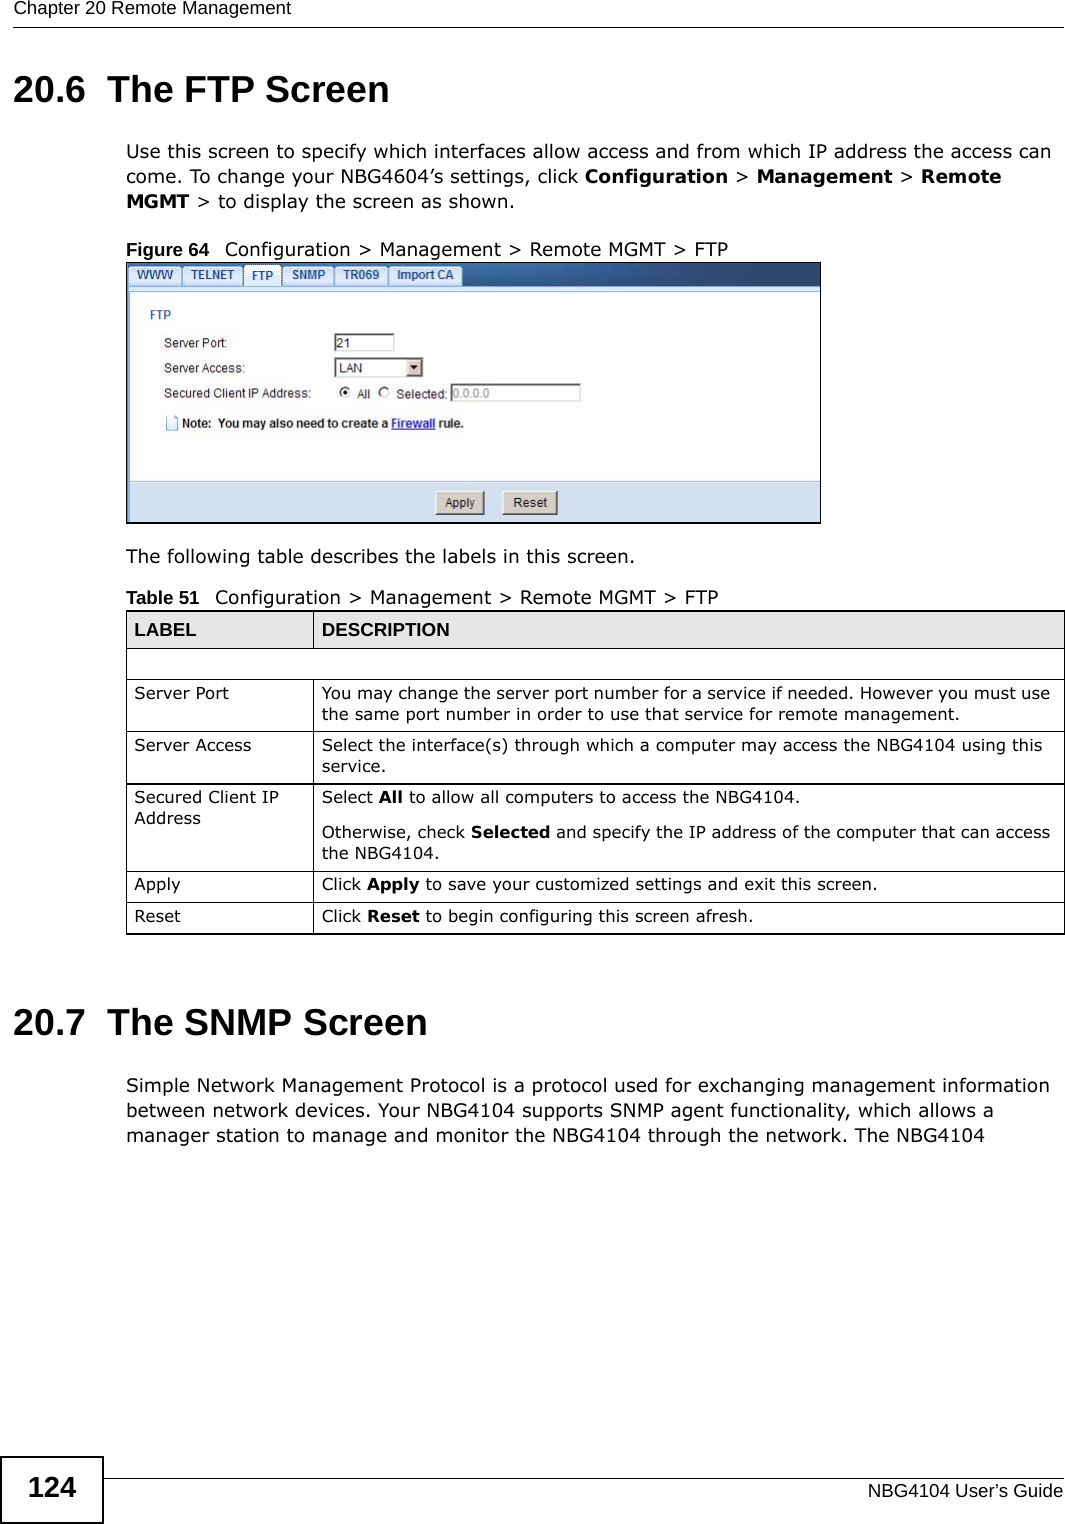 Chapter 20 Remote ManagementNBG4104 User’s Guide12420.6  The FTP ScreenUse this screen to specify which interfaces allow access and from which IP address the access can come. To change your NBG4604’s settings, click Configuration &gt; Management &gt; Remote MGMT &gt; to display the screen as shown.Figure 64   Configuration &gt; Management &gt; Remote MGMT &gt; FTP The following table describes the labels in this screen. 20.7  The SNMP ScreenSimple Network Management Protocol is a protocol used for exchanging management information between network devices. Your NBG4104 supports SNMP agent functionality, which allows a manager station to manage and monitor the NBG4104 through the network. The NBG4104 Table 51   Configuration &gt; Management &gt; Remote MGMT &gt; FTPLABEL DESCRIPTIONServer Port You may change the server port number for a service if needed. However you must use the same port number in order to use that service for remote management.Server Access Select the interface(s) through which a computer may access the NBG4104 using this service.Secured Client IP AddressSelect All to allow all computers to access the NBG4104.Otherwise, check Selected and specify the IP address of the computer that can access the NBG4104.Apply Click Apply to save your customized settings and exit this screen. Reset Click Reset to begin configuring this screen afresh.